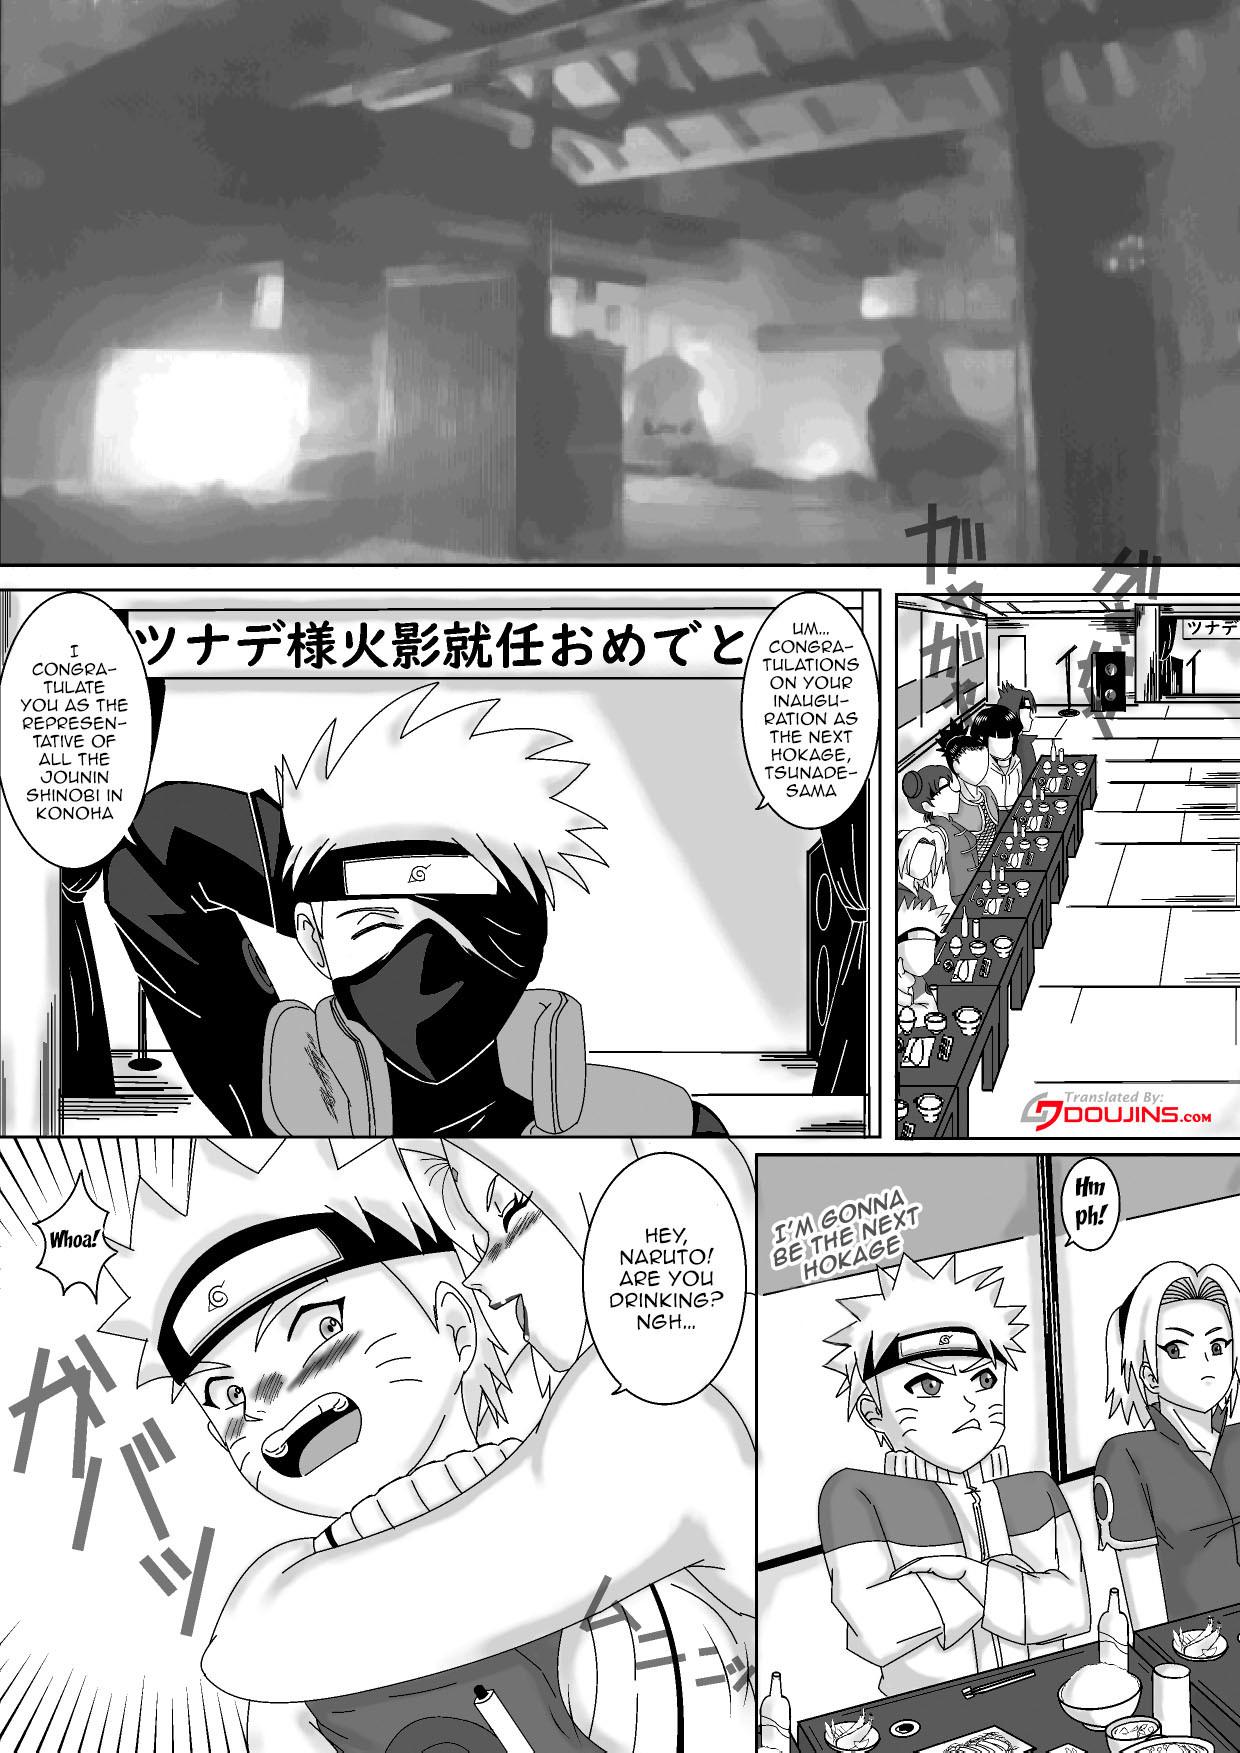 Punished Nomisugite Deisui Shita BBA to Yarimakutta Ken!! | The Case Of Having Sex With This Old Lady After She Got Herself Really Drunk - Naruto Ffm - Page 2